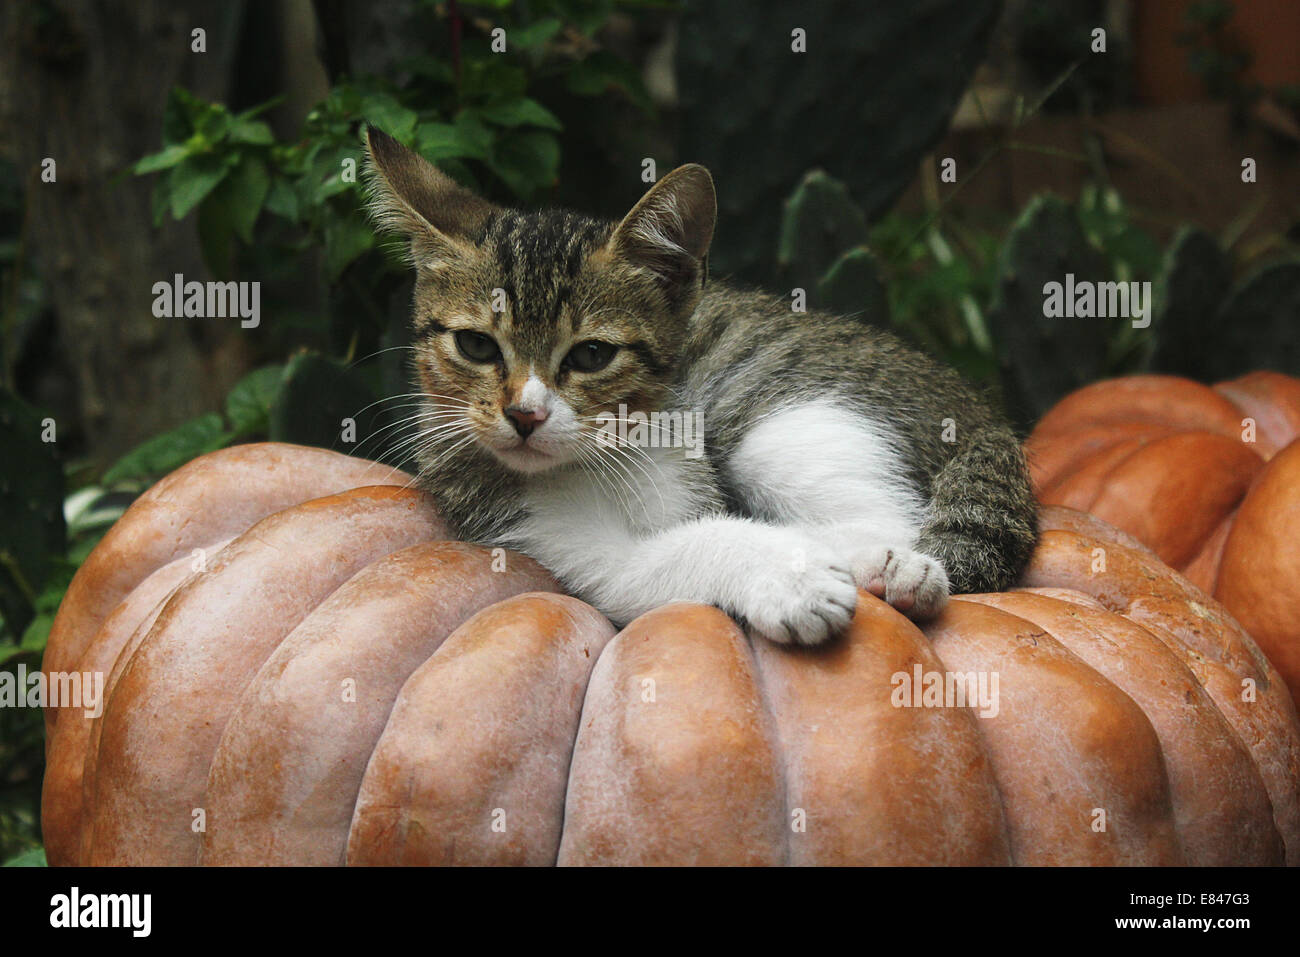 Stray cat sitting on a pumpkin in the backstreets of Taormina, Sicily. Stock Photo